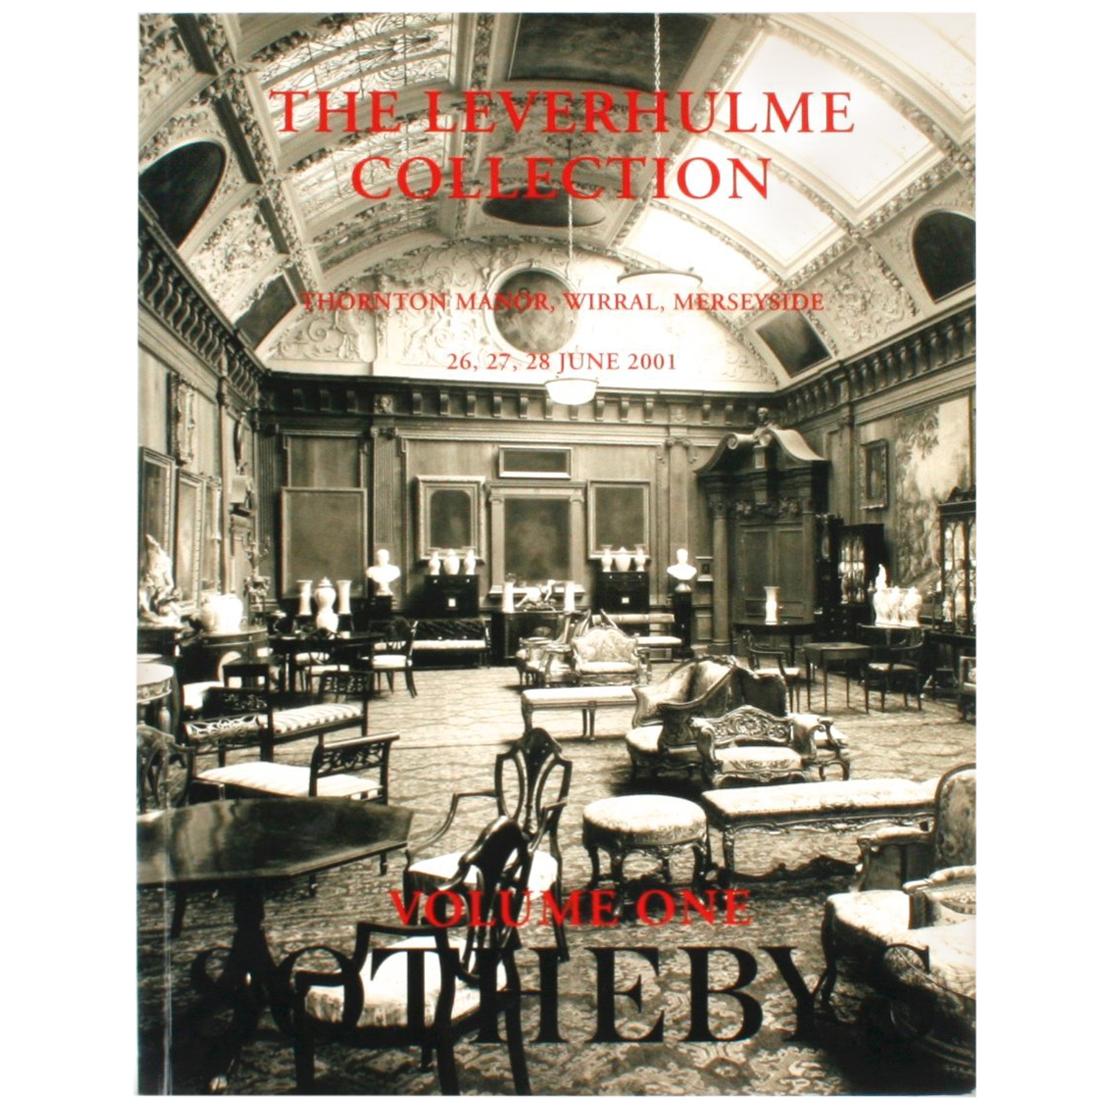 "The Leverhulme Collection: Thornton Manor, Wirral Merseyside - Volume One" For Sale